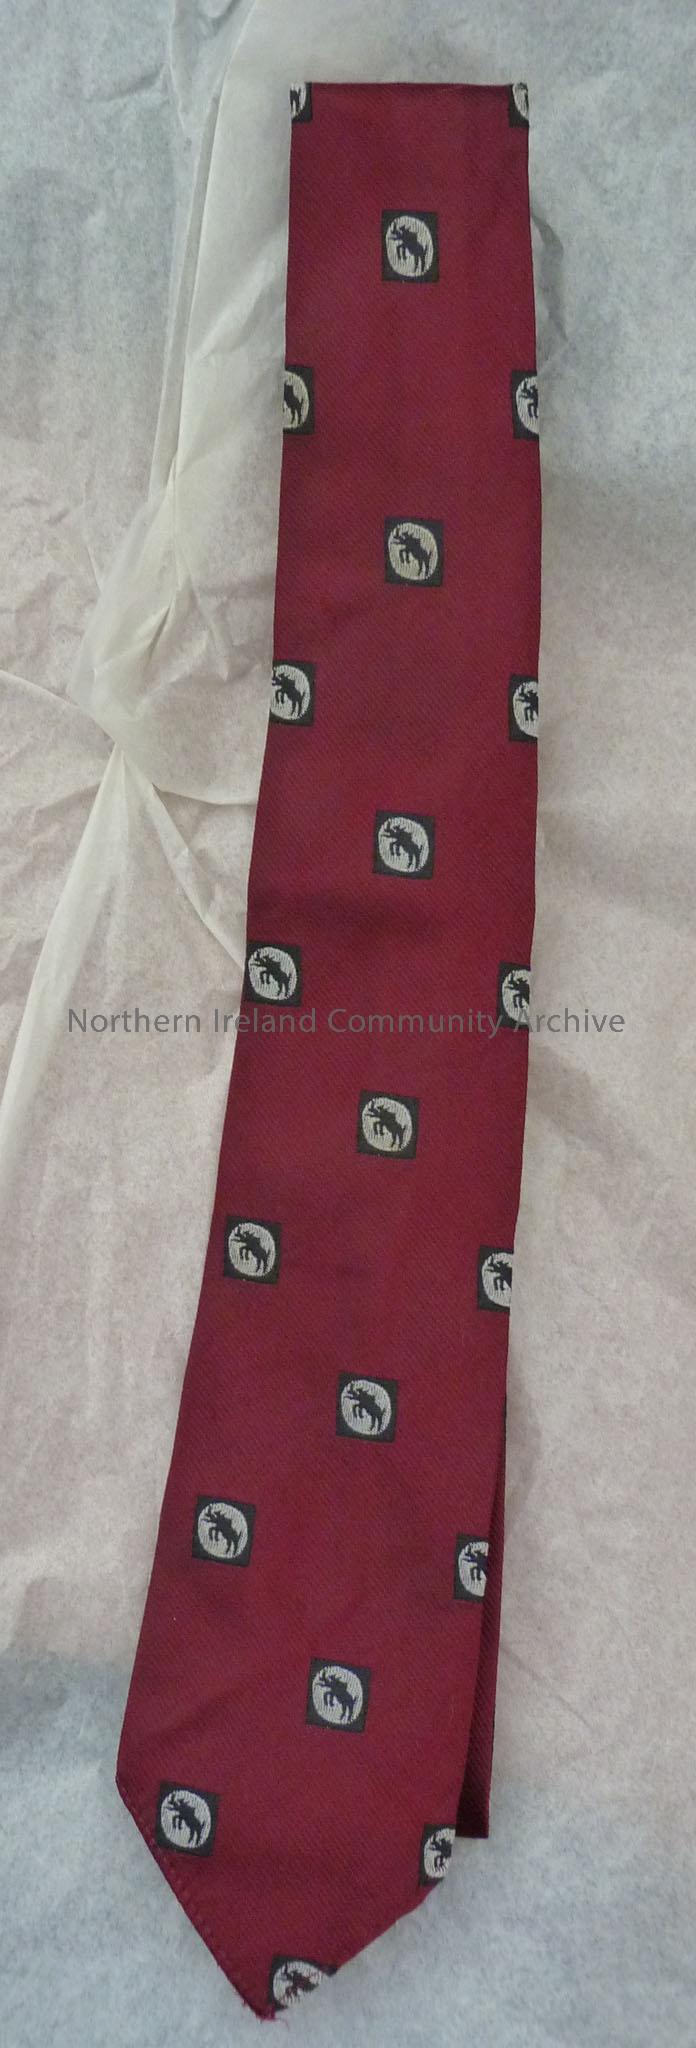 Maroon neck tie with images of a black boar in a white circle inside a black square across it.